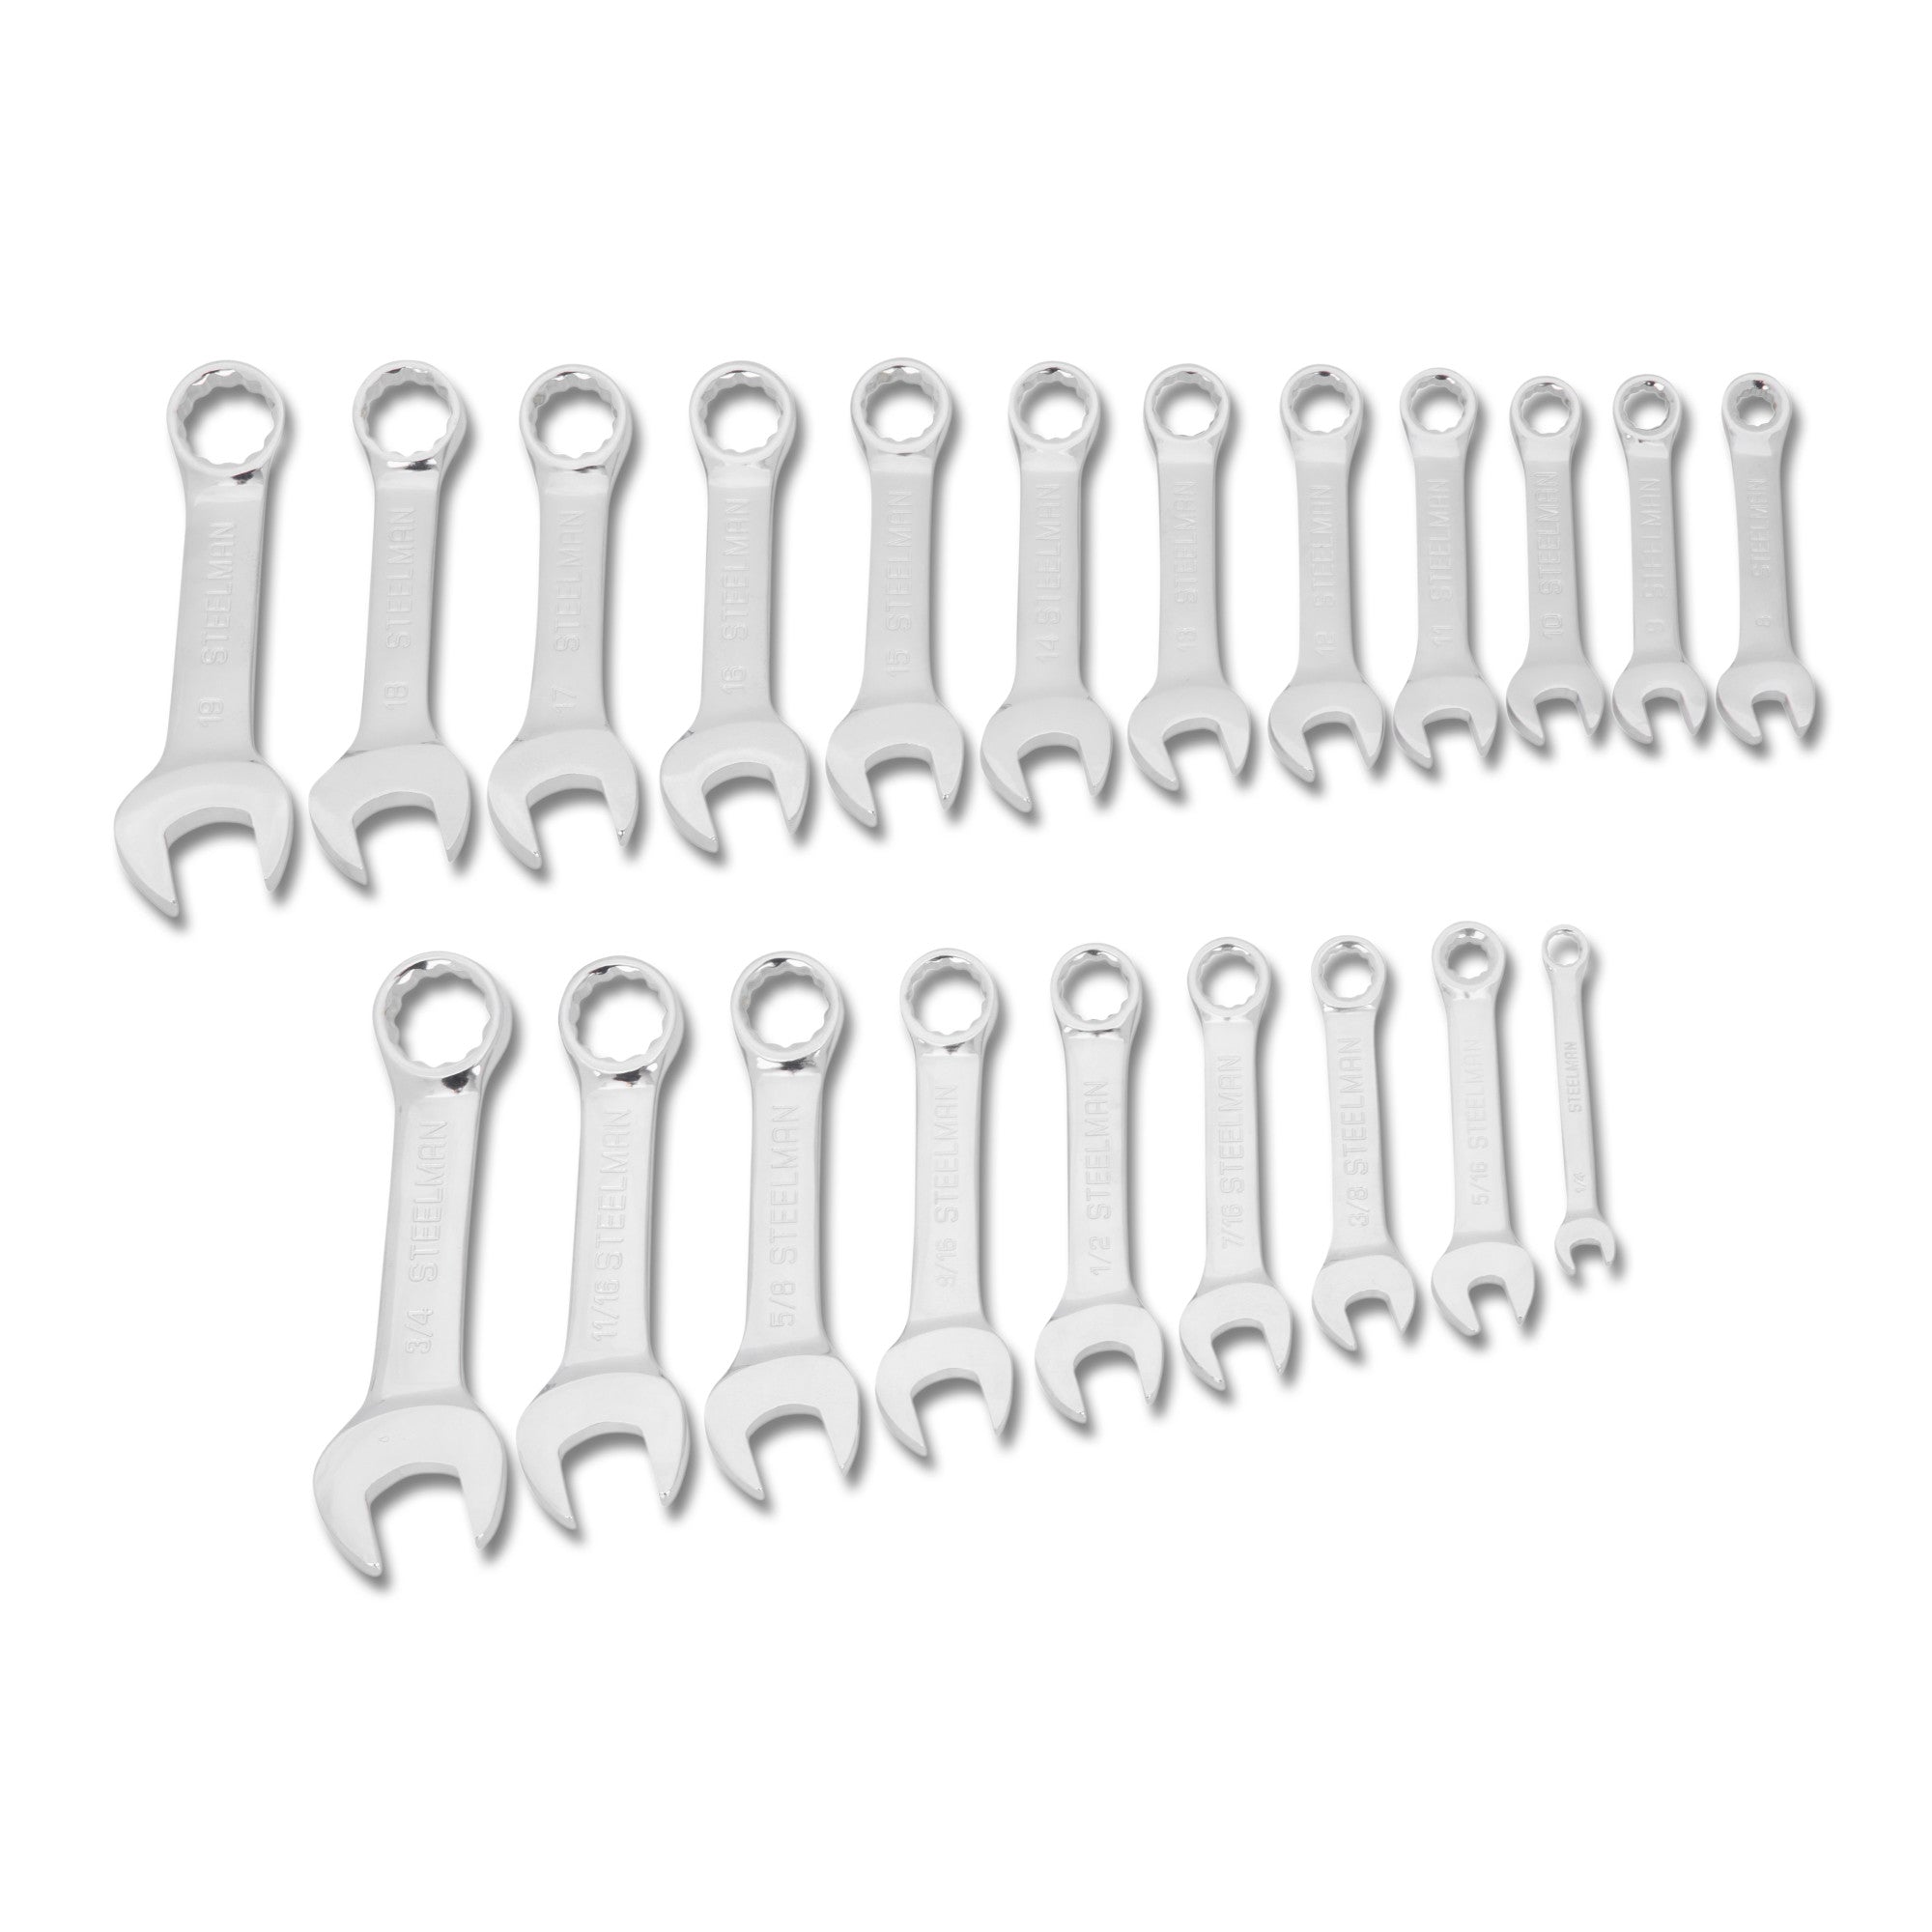 Steelman 21-Piece Metric And Sae Stubby Combination Wrench Set